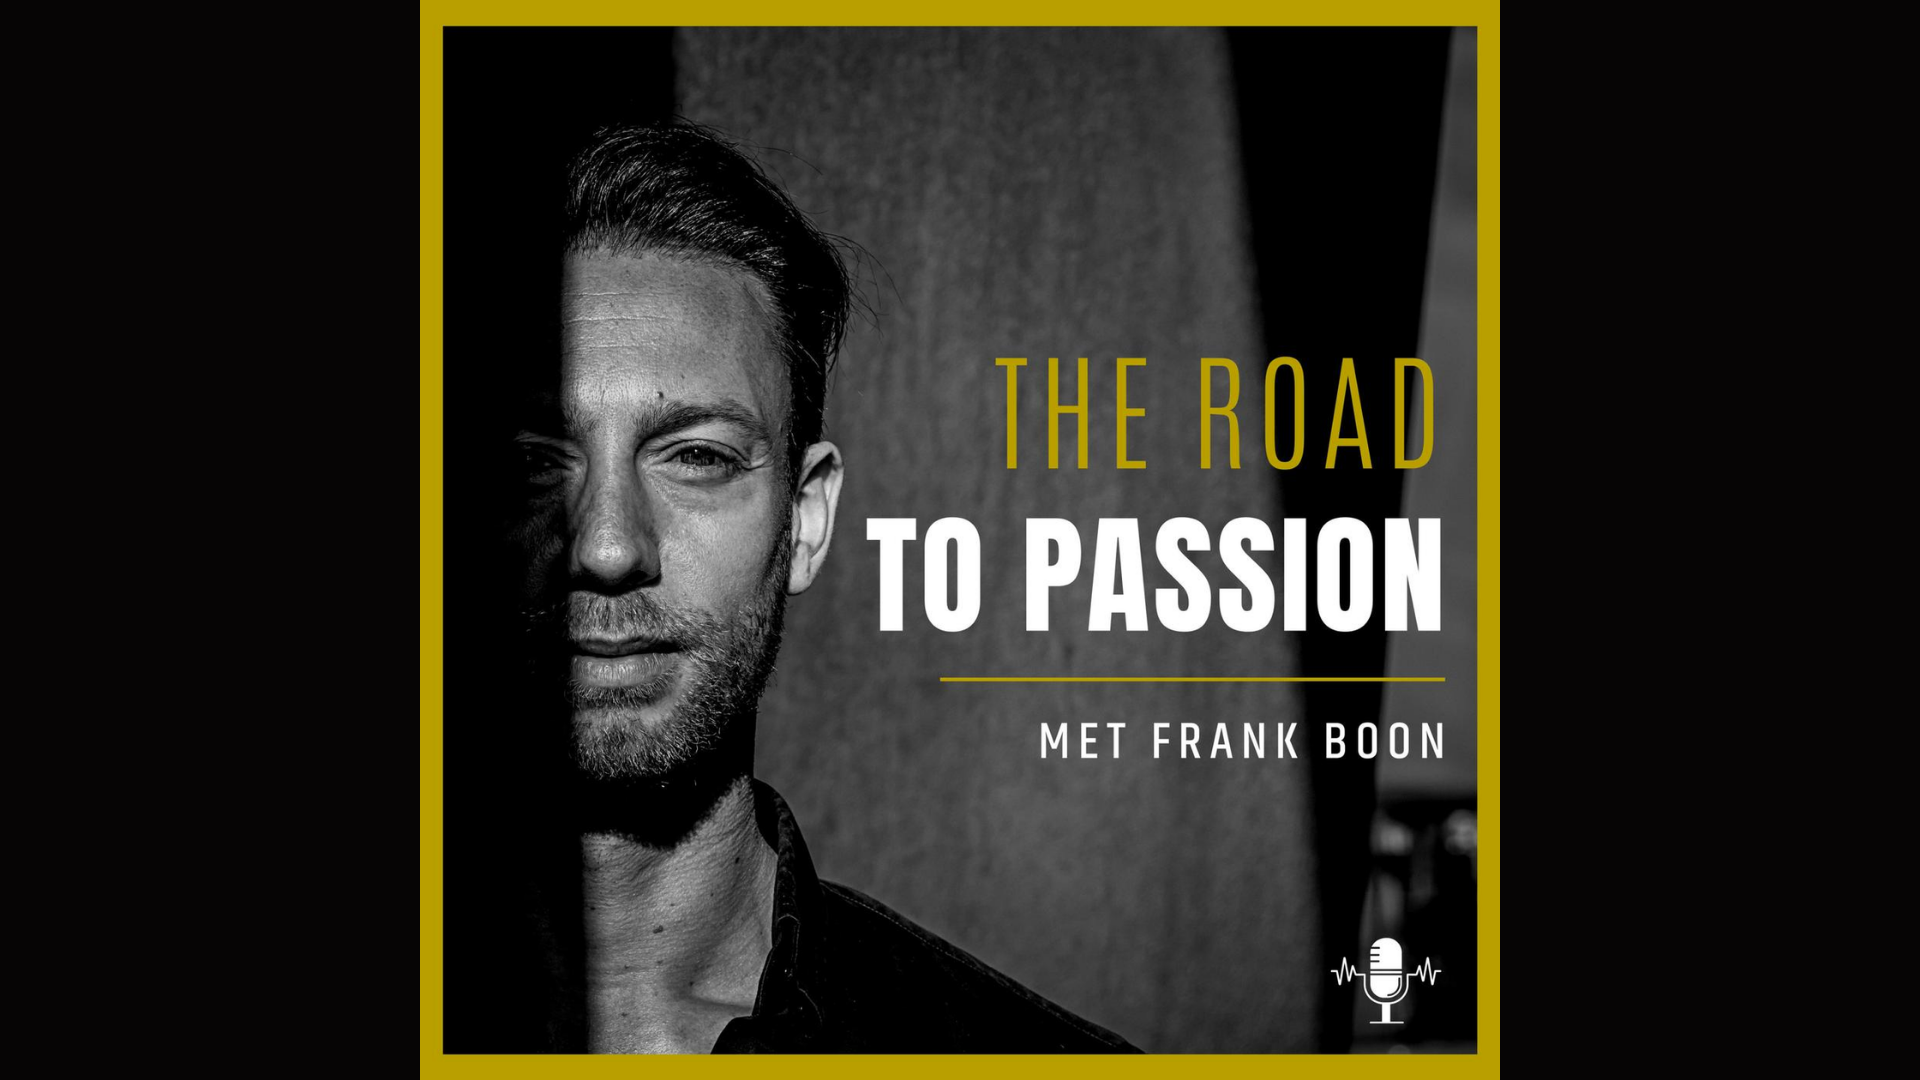 The Road to Passion podcast